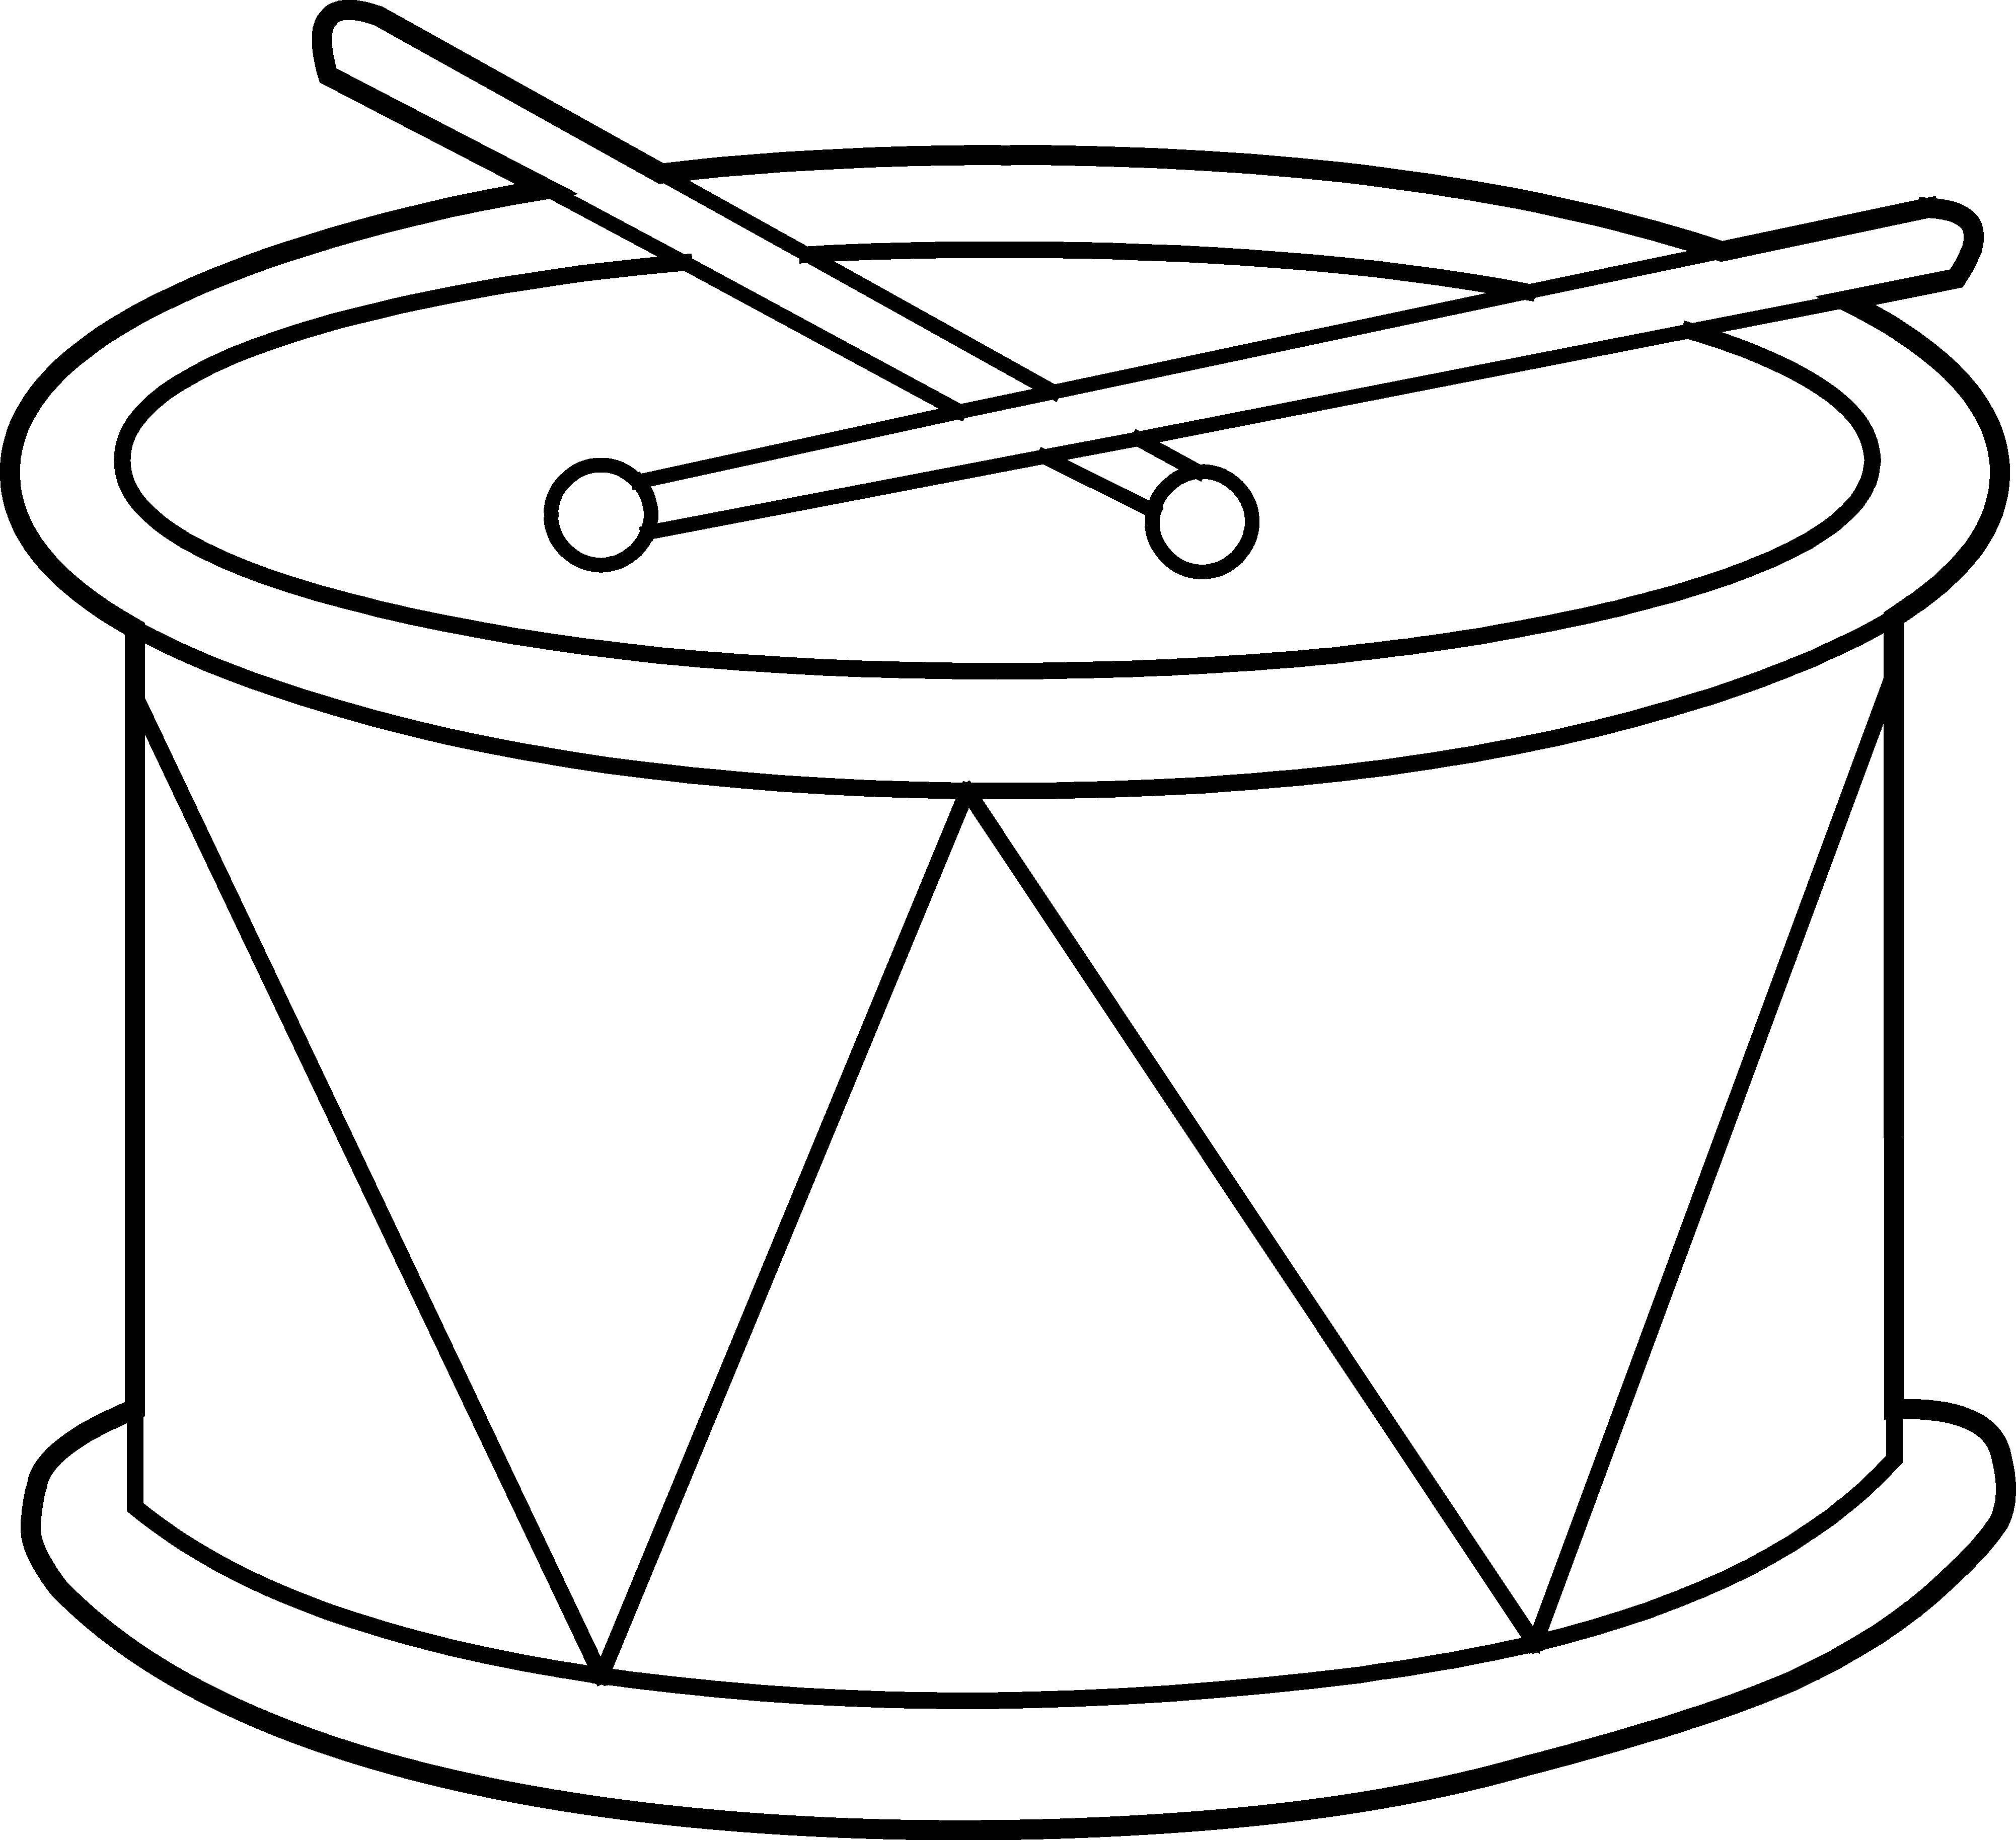 Coloring Drum. Category Drum . Tags:  drums, percussion, music.